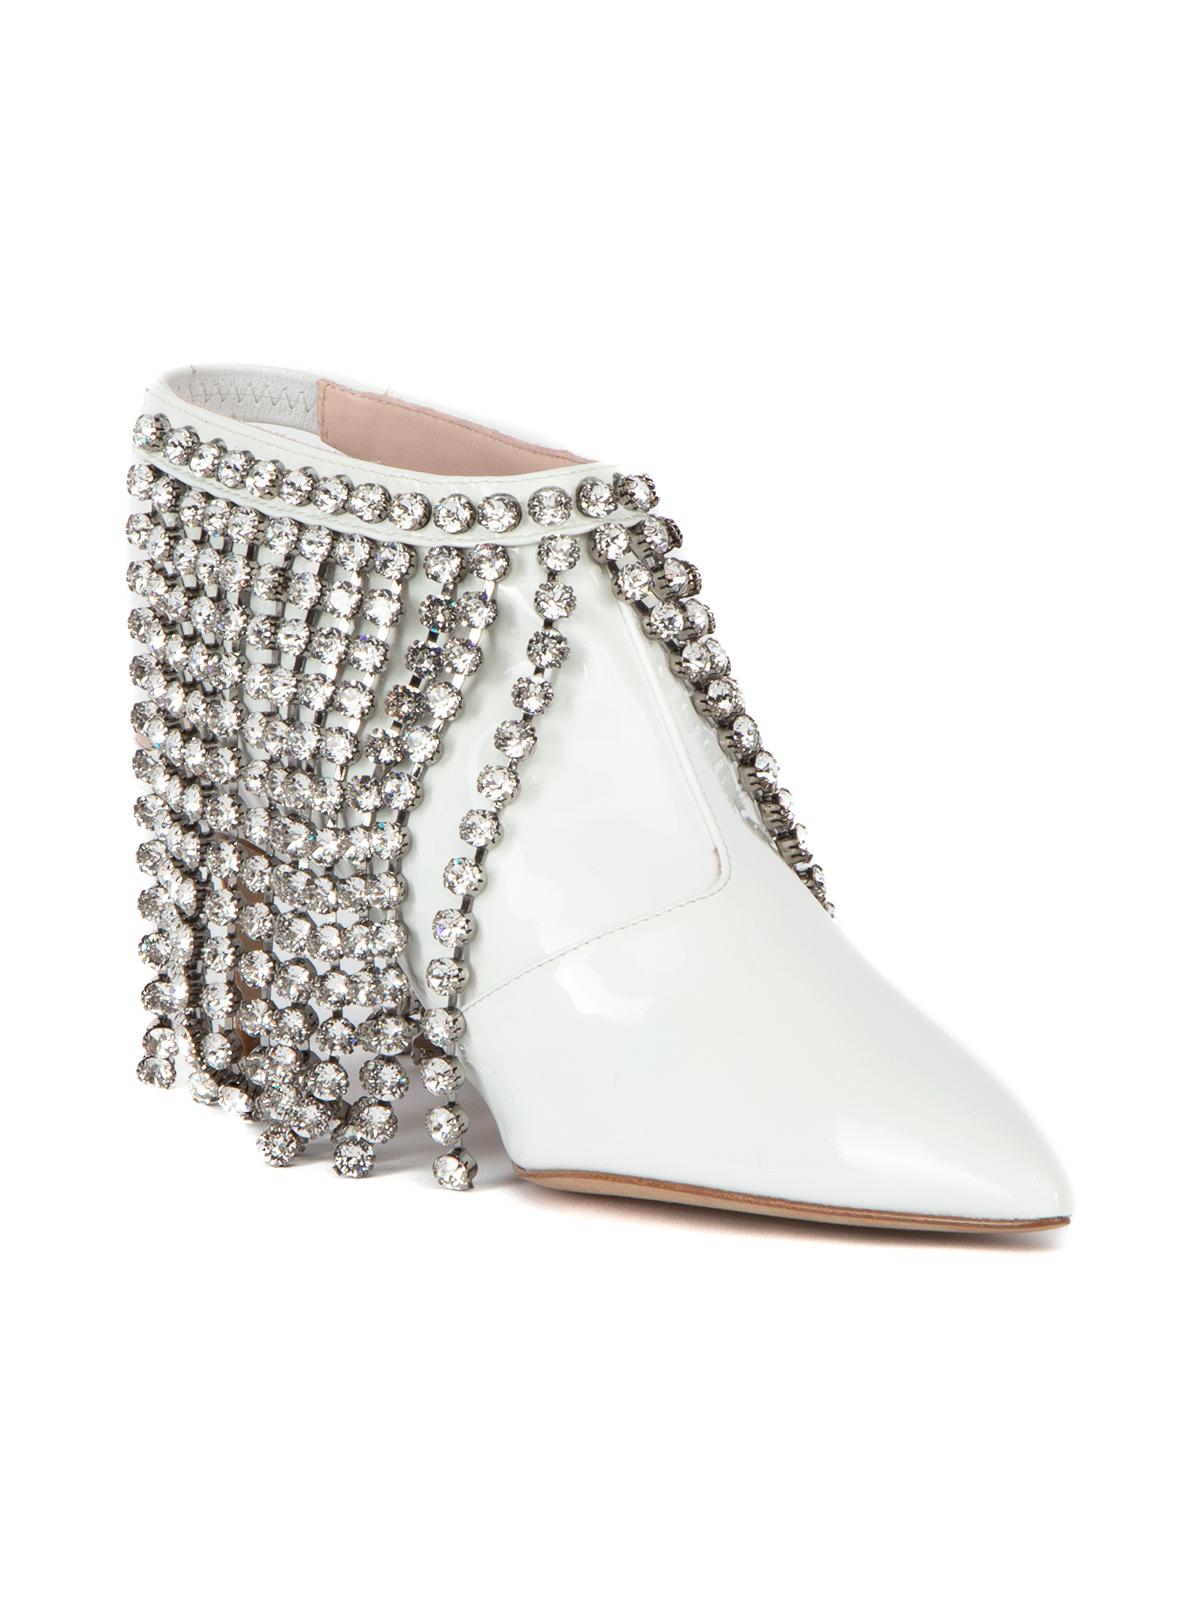 CONDITION is Very good. Minimal wear to shoes is evident. Minimal wear to heel stem on this used Christopher Kane designer resale item.   Details  White Leather - patent Crystal fringe embellishments Ankle boots Kitten heel Pointed toe Open heel-